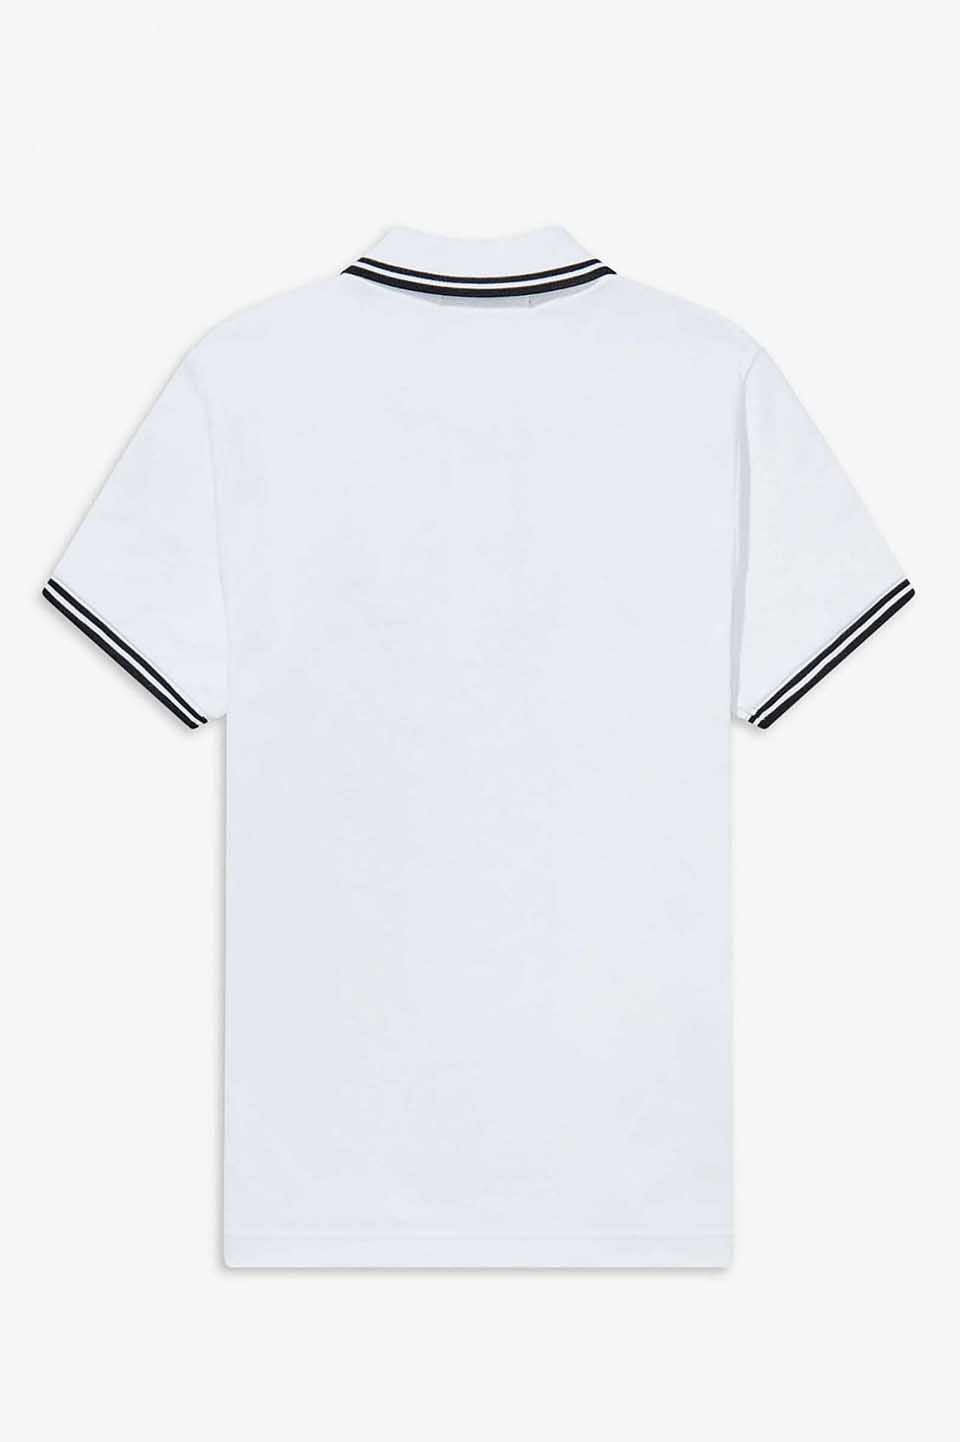 The Fred Perry Shirt - G3600(8 200：WHITE): | FRED PERRY JAPAN | フレッドペリー ...